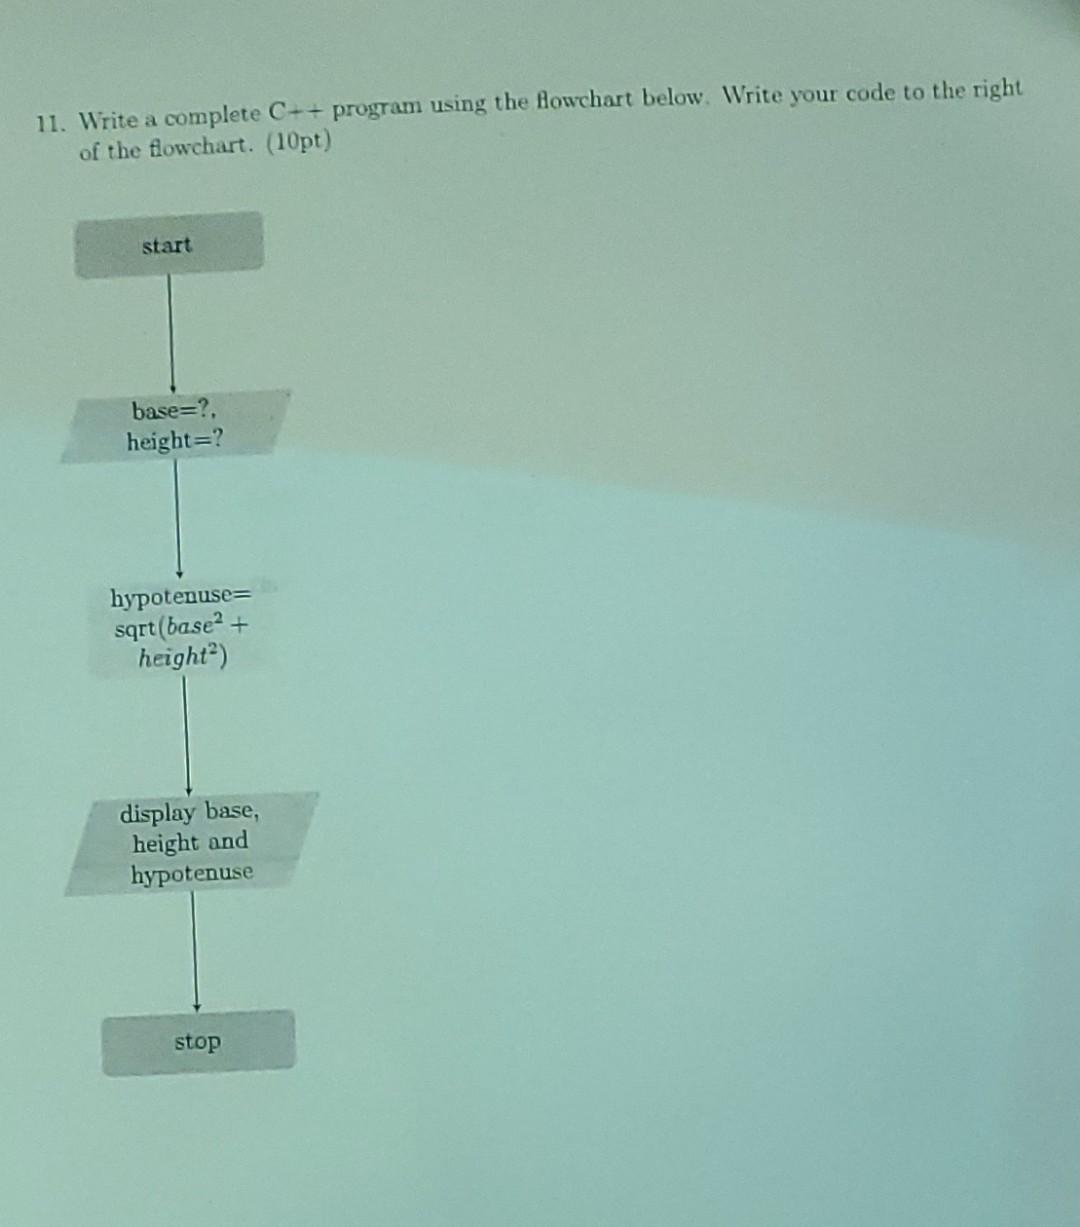 11. Write a complete C++ program using the flowchart below. Write your code to the right of the flowchart.